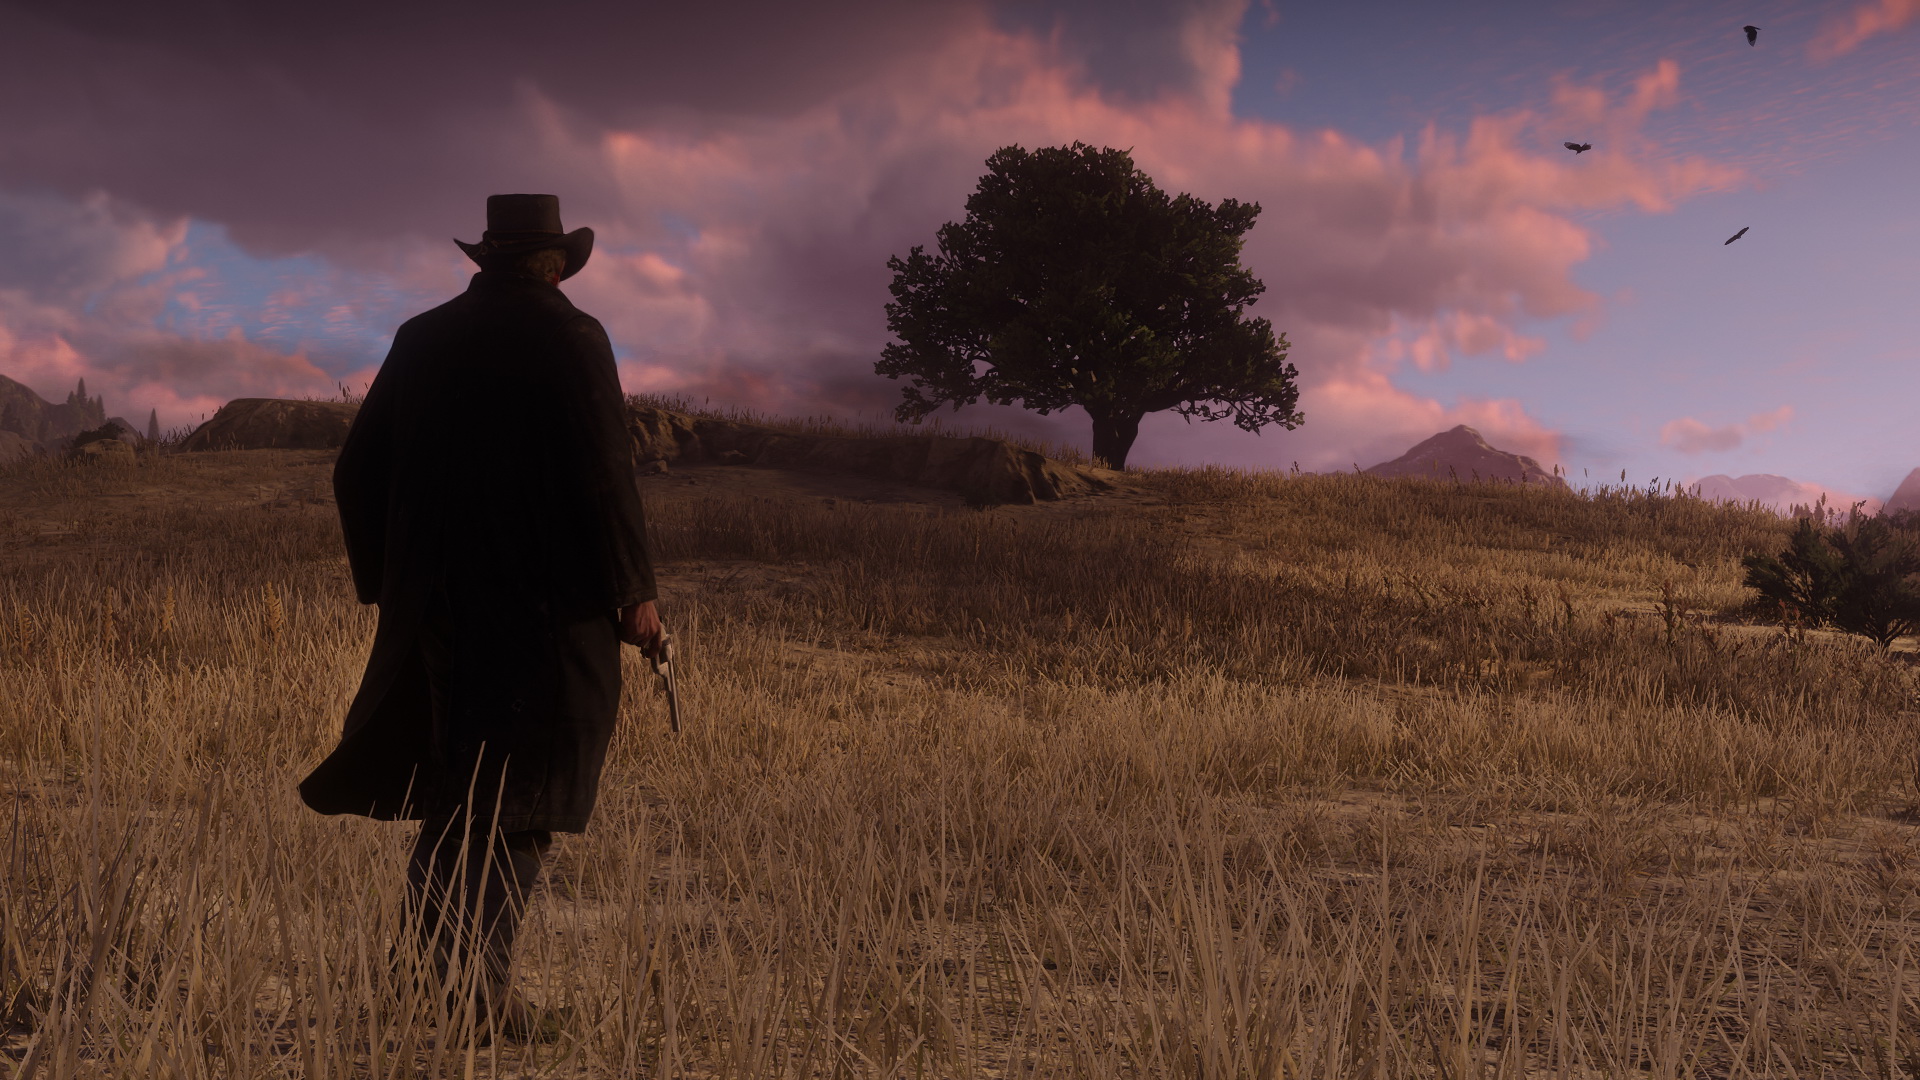 Red Dead Redemption 2 is coming to PC - VG247